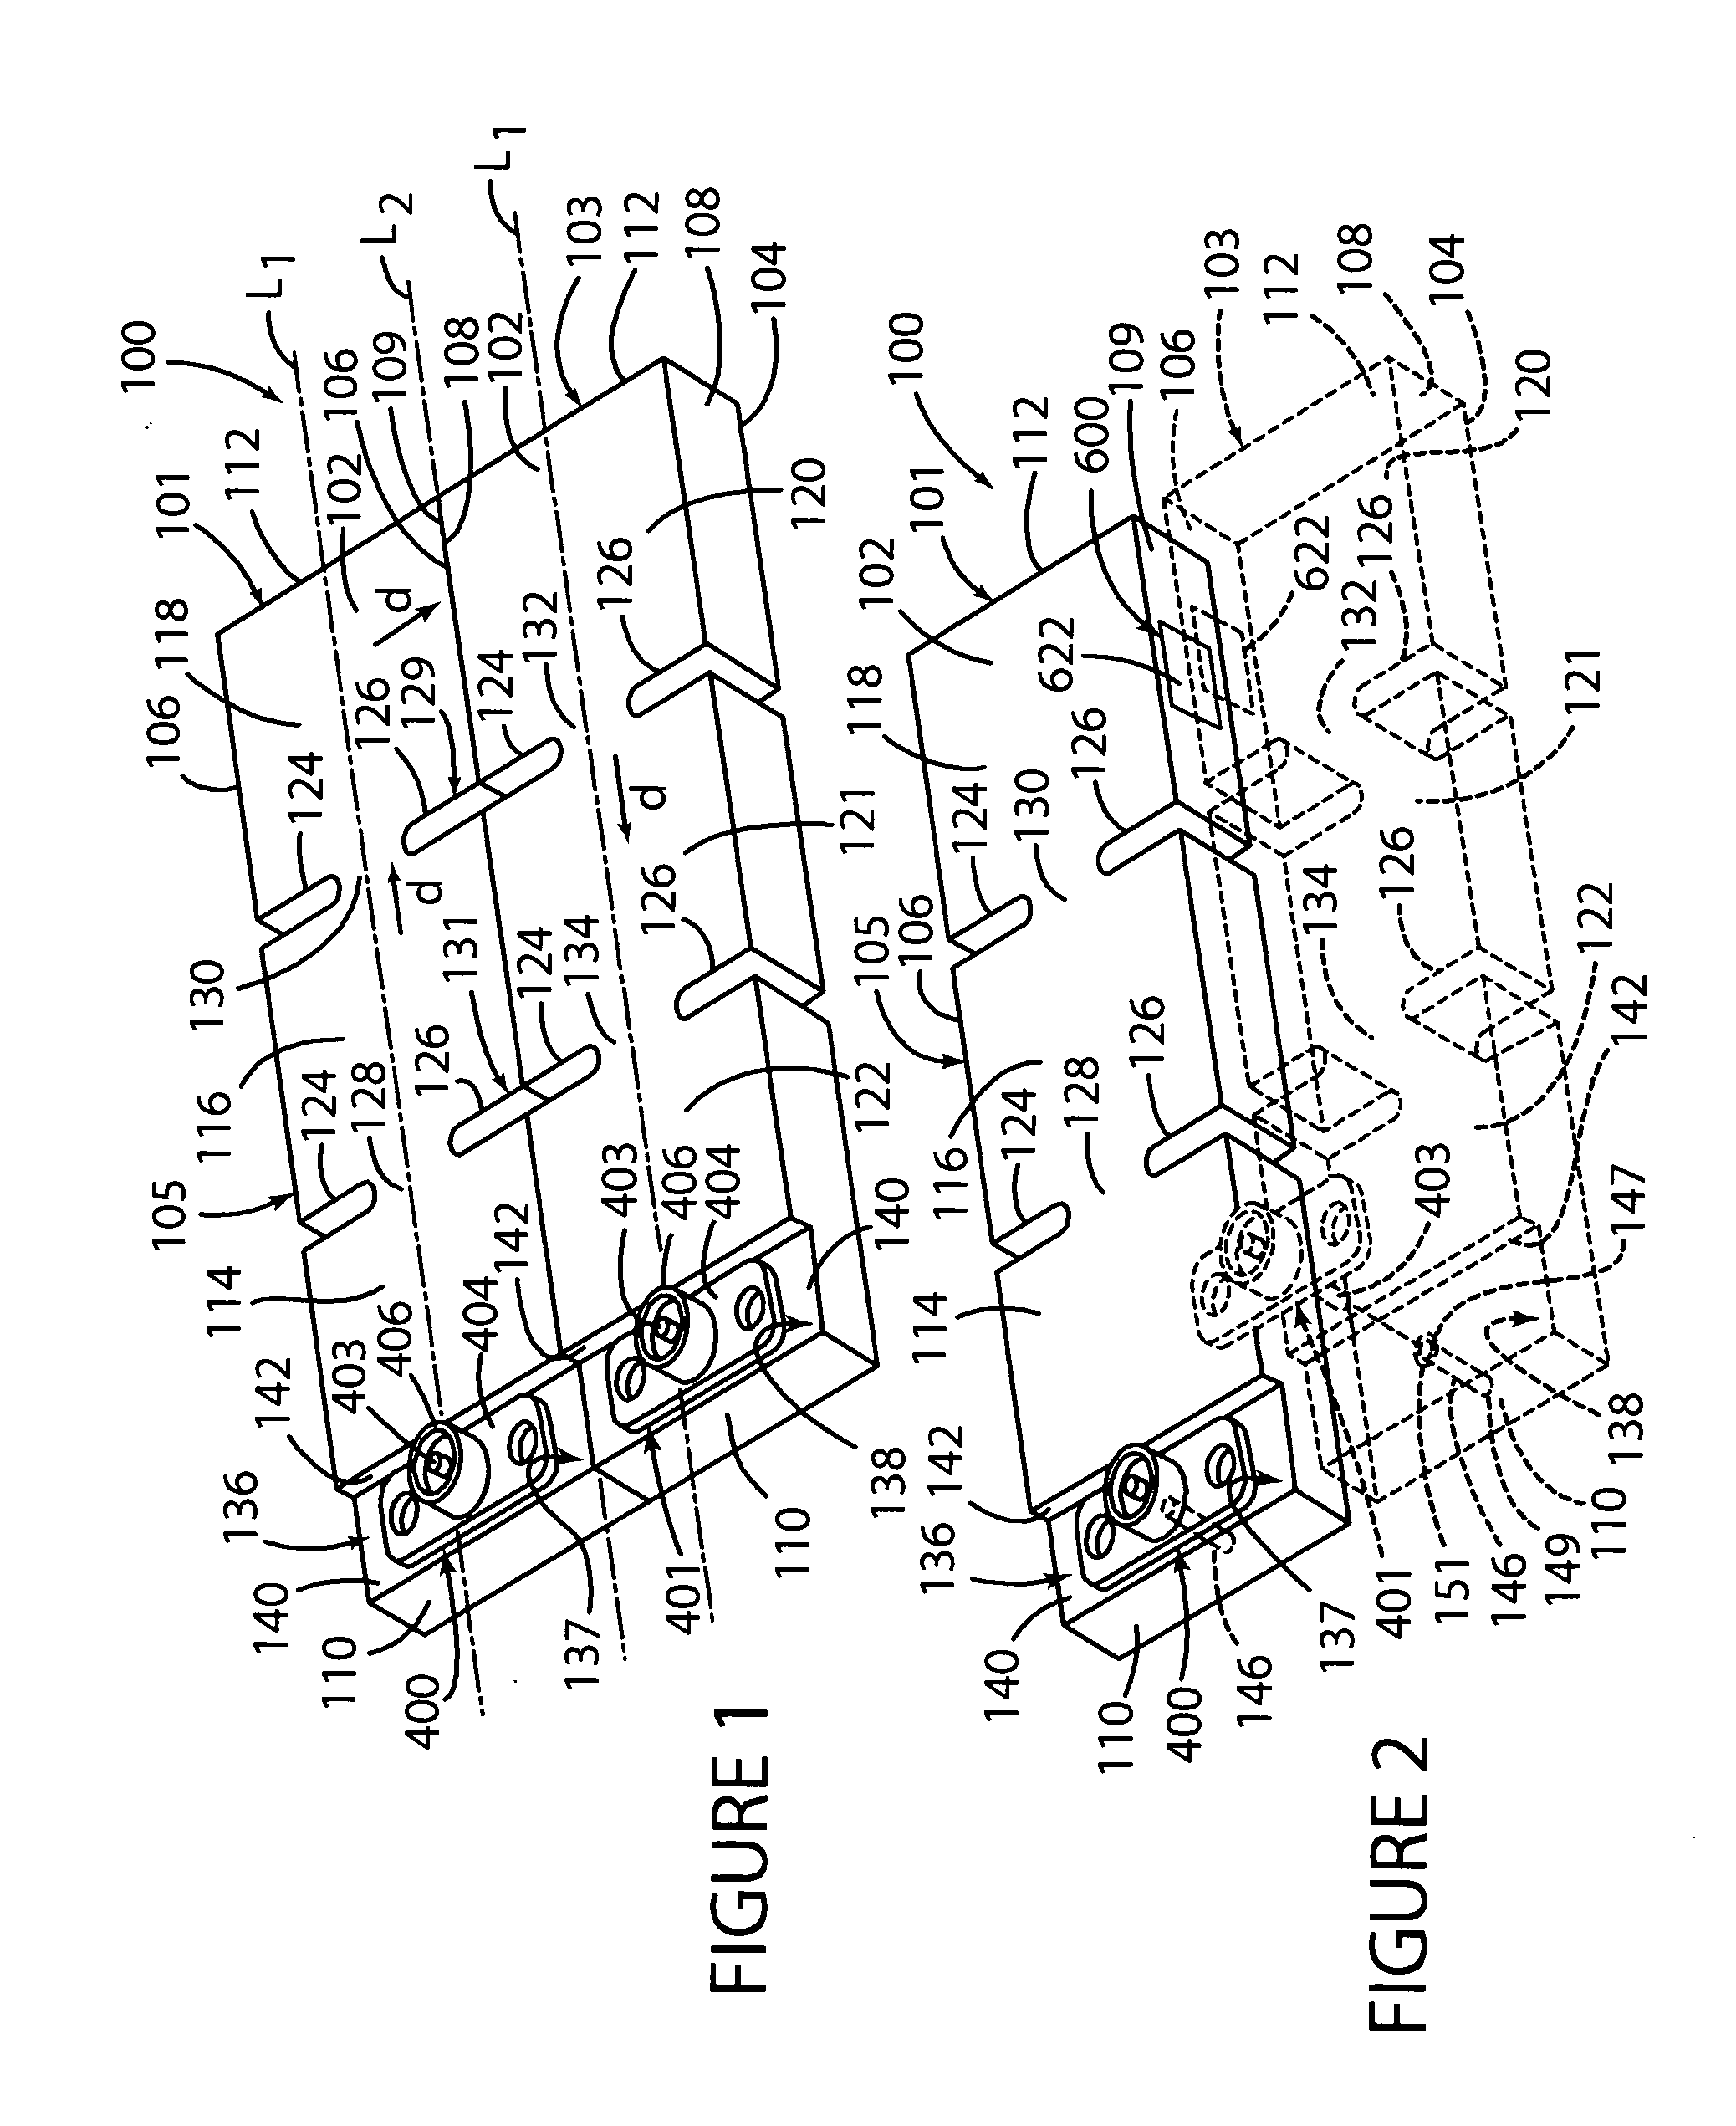 Dielectric waveguide filter with direct coupling and alternative cross-coupling